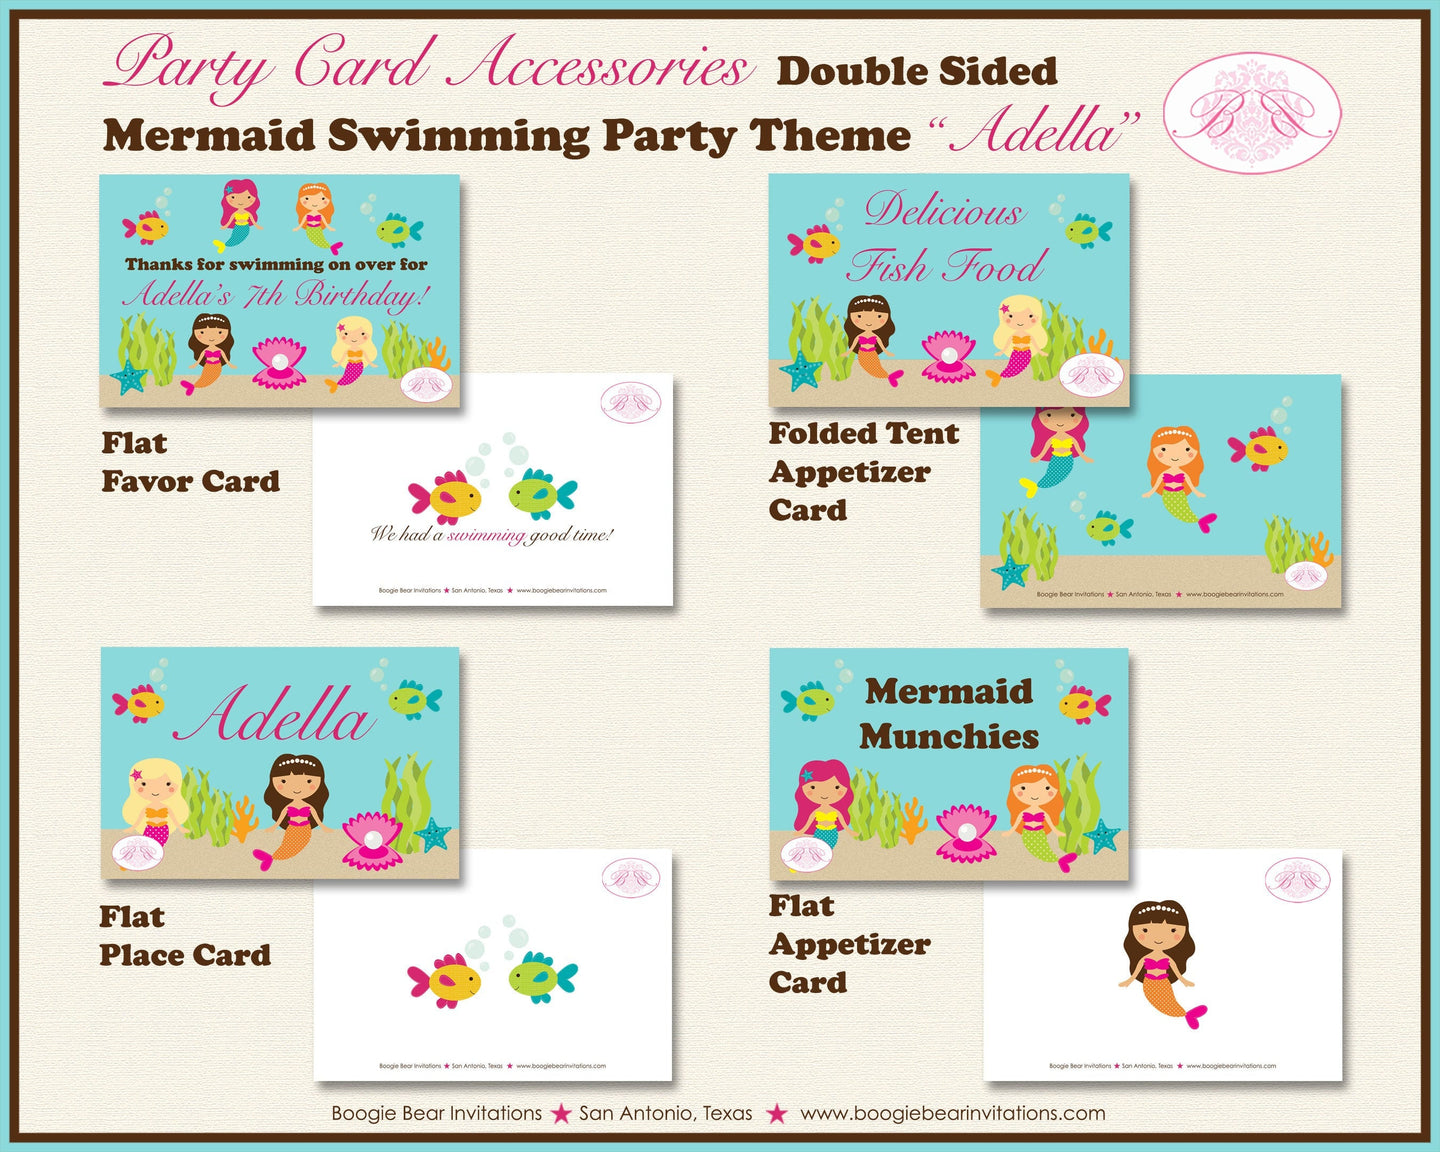 Mermaid Birthday Party Favor Card Appetizer Food Place Sign Label Swimming Splash Pool Ocean Fish Girl Boogie Bear Invitations Adella Theme